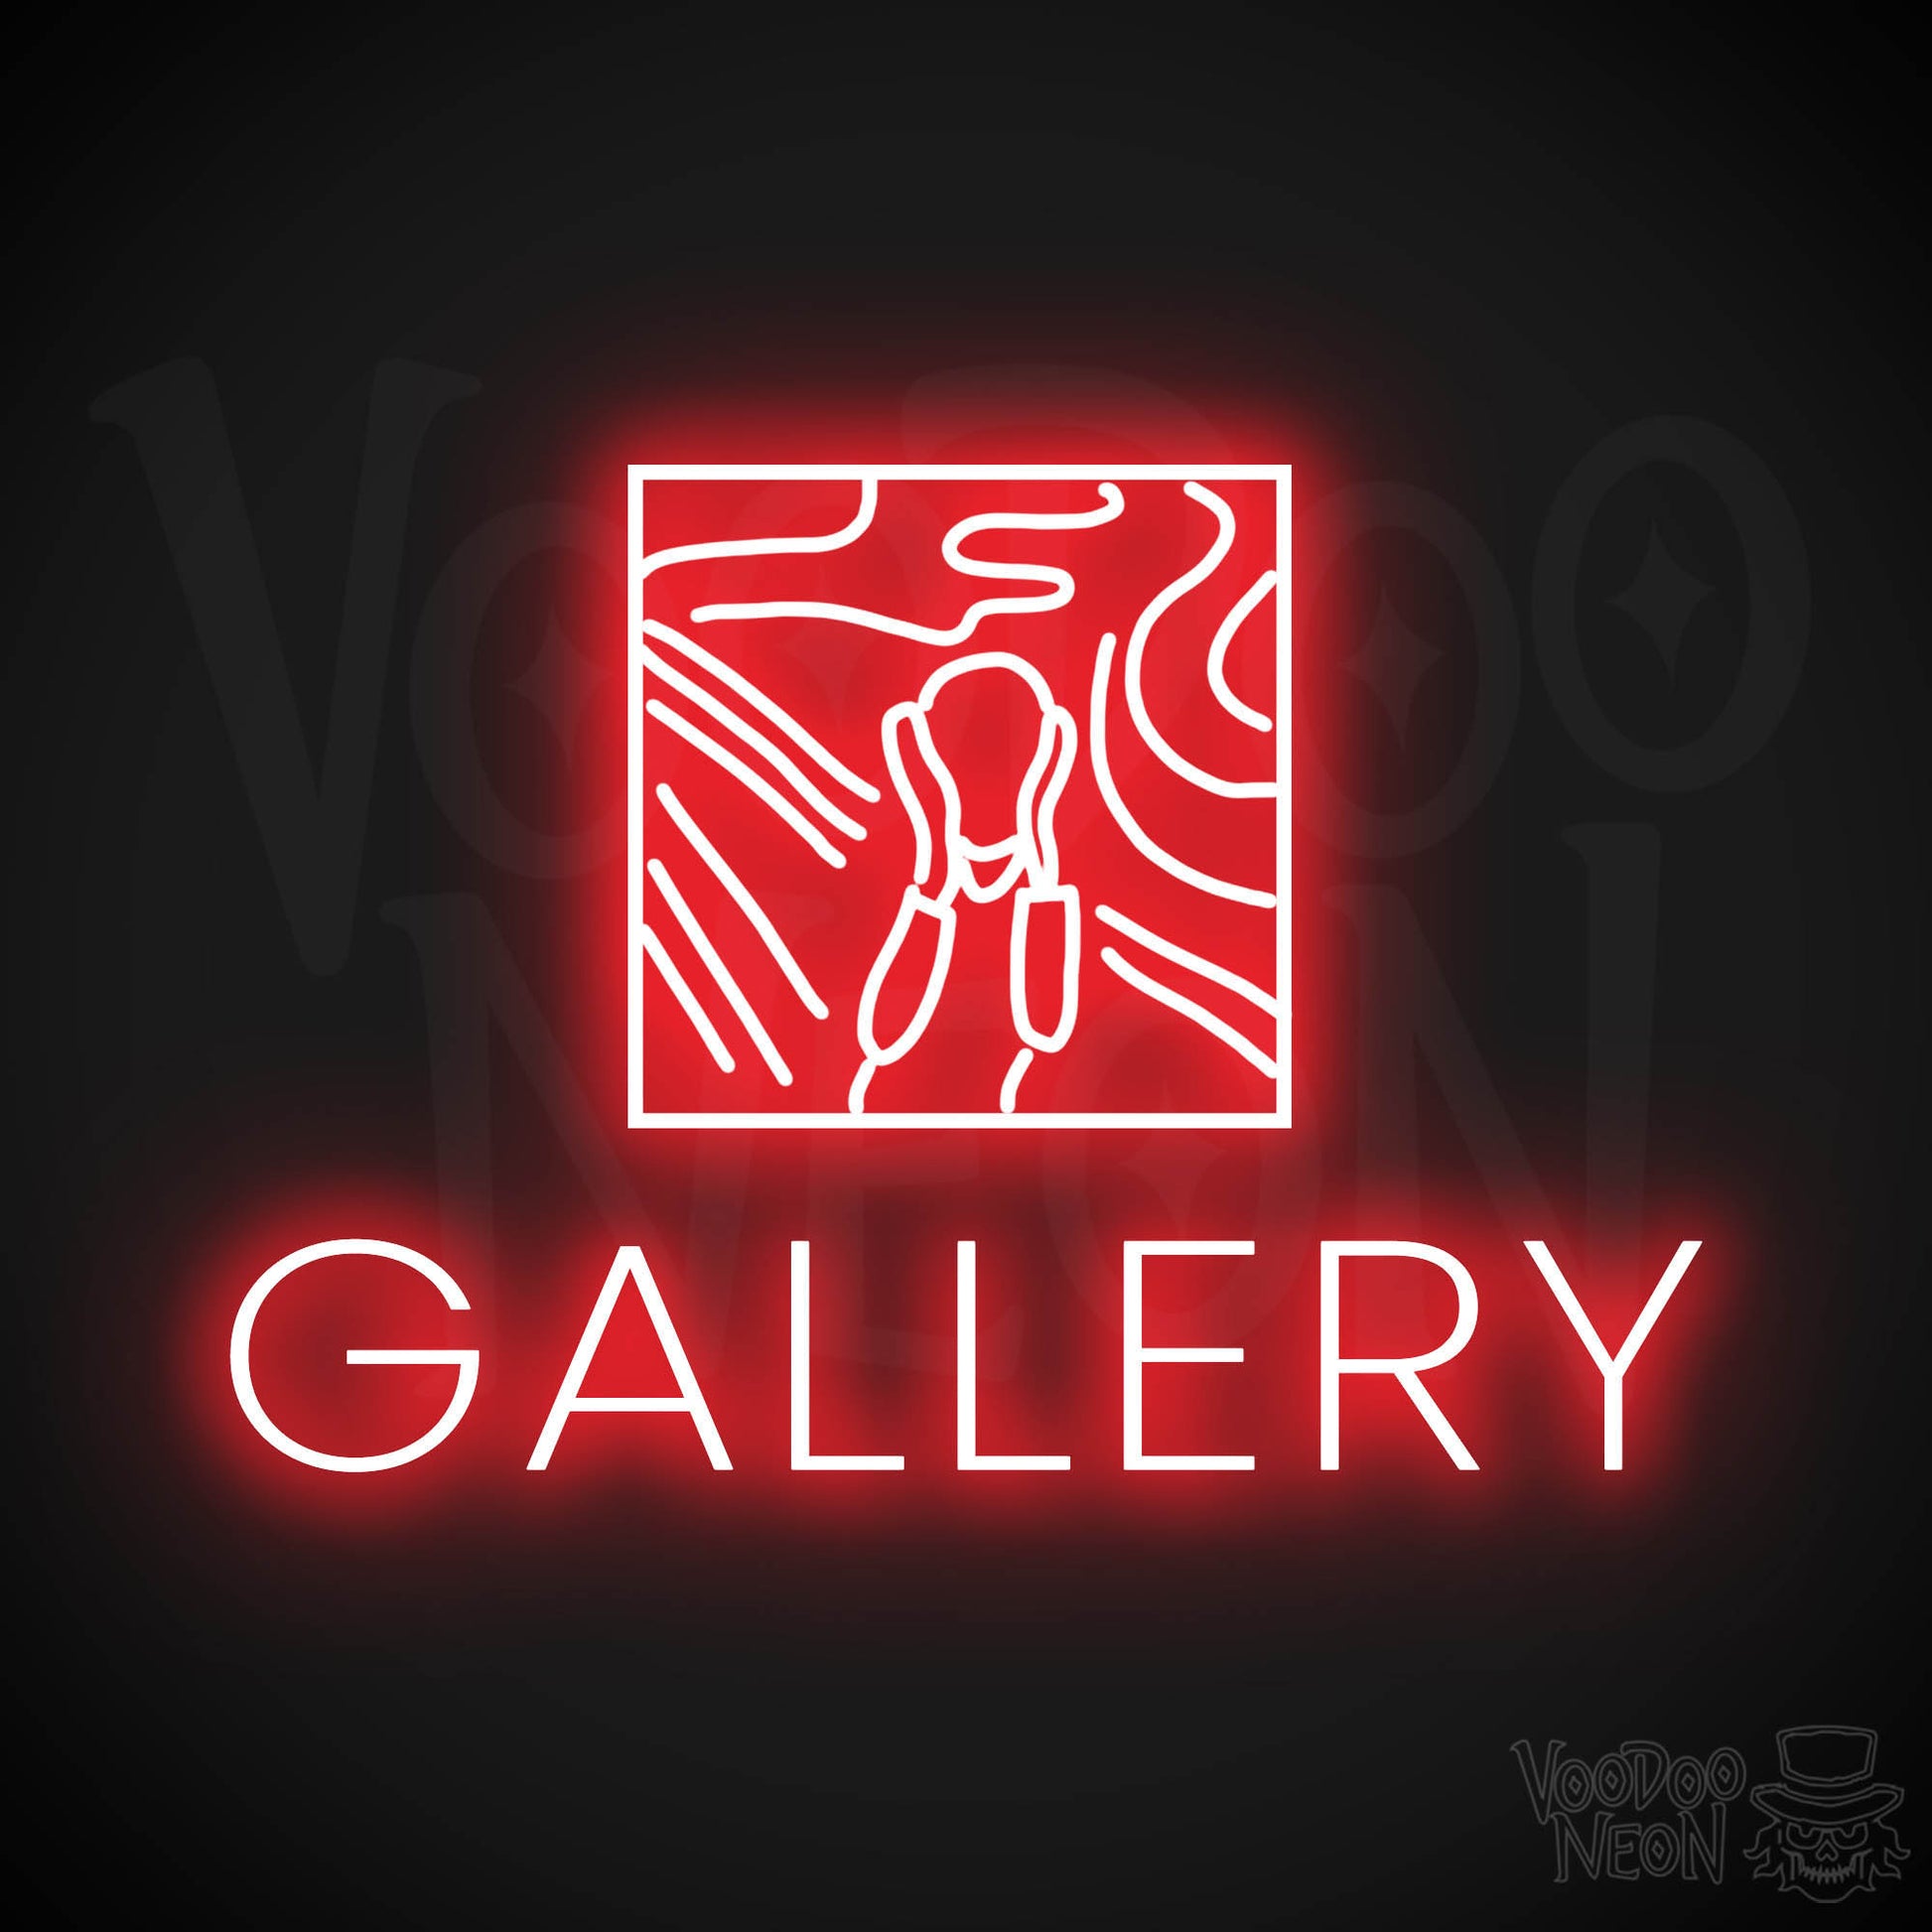 Gallery LED Neon - Red